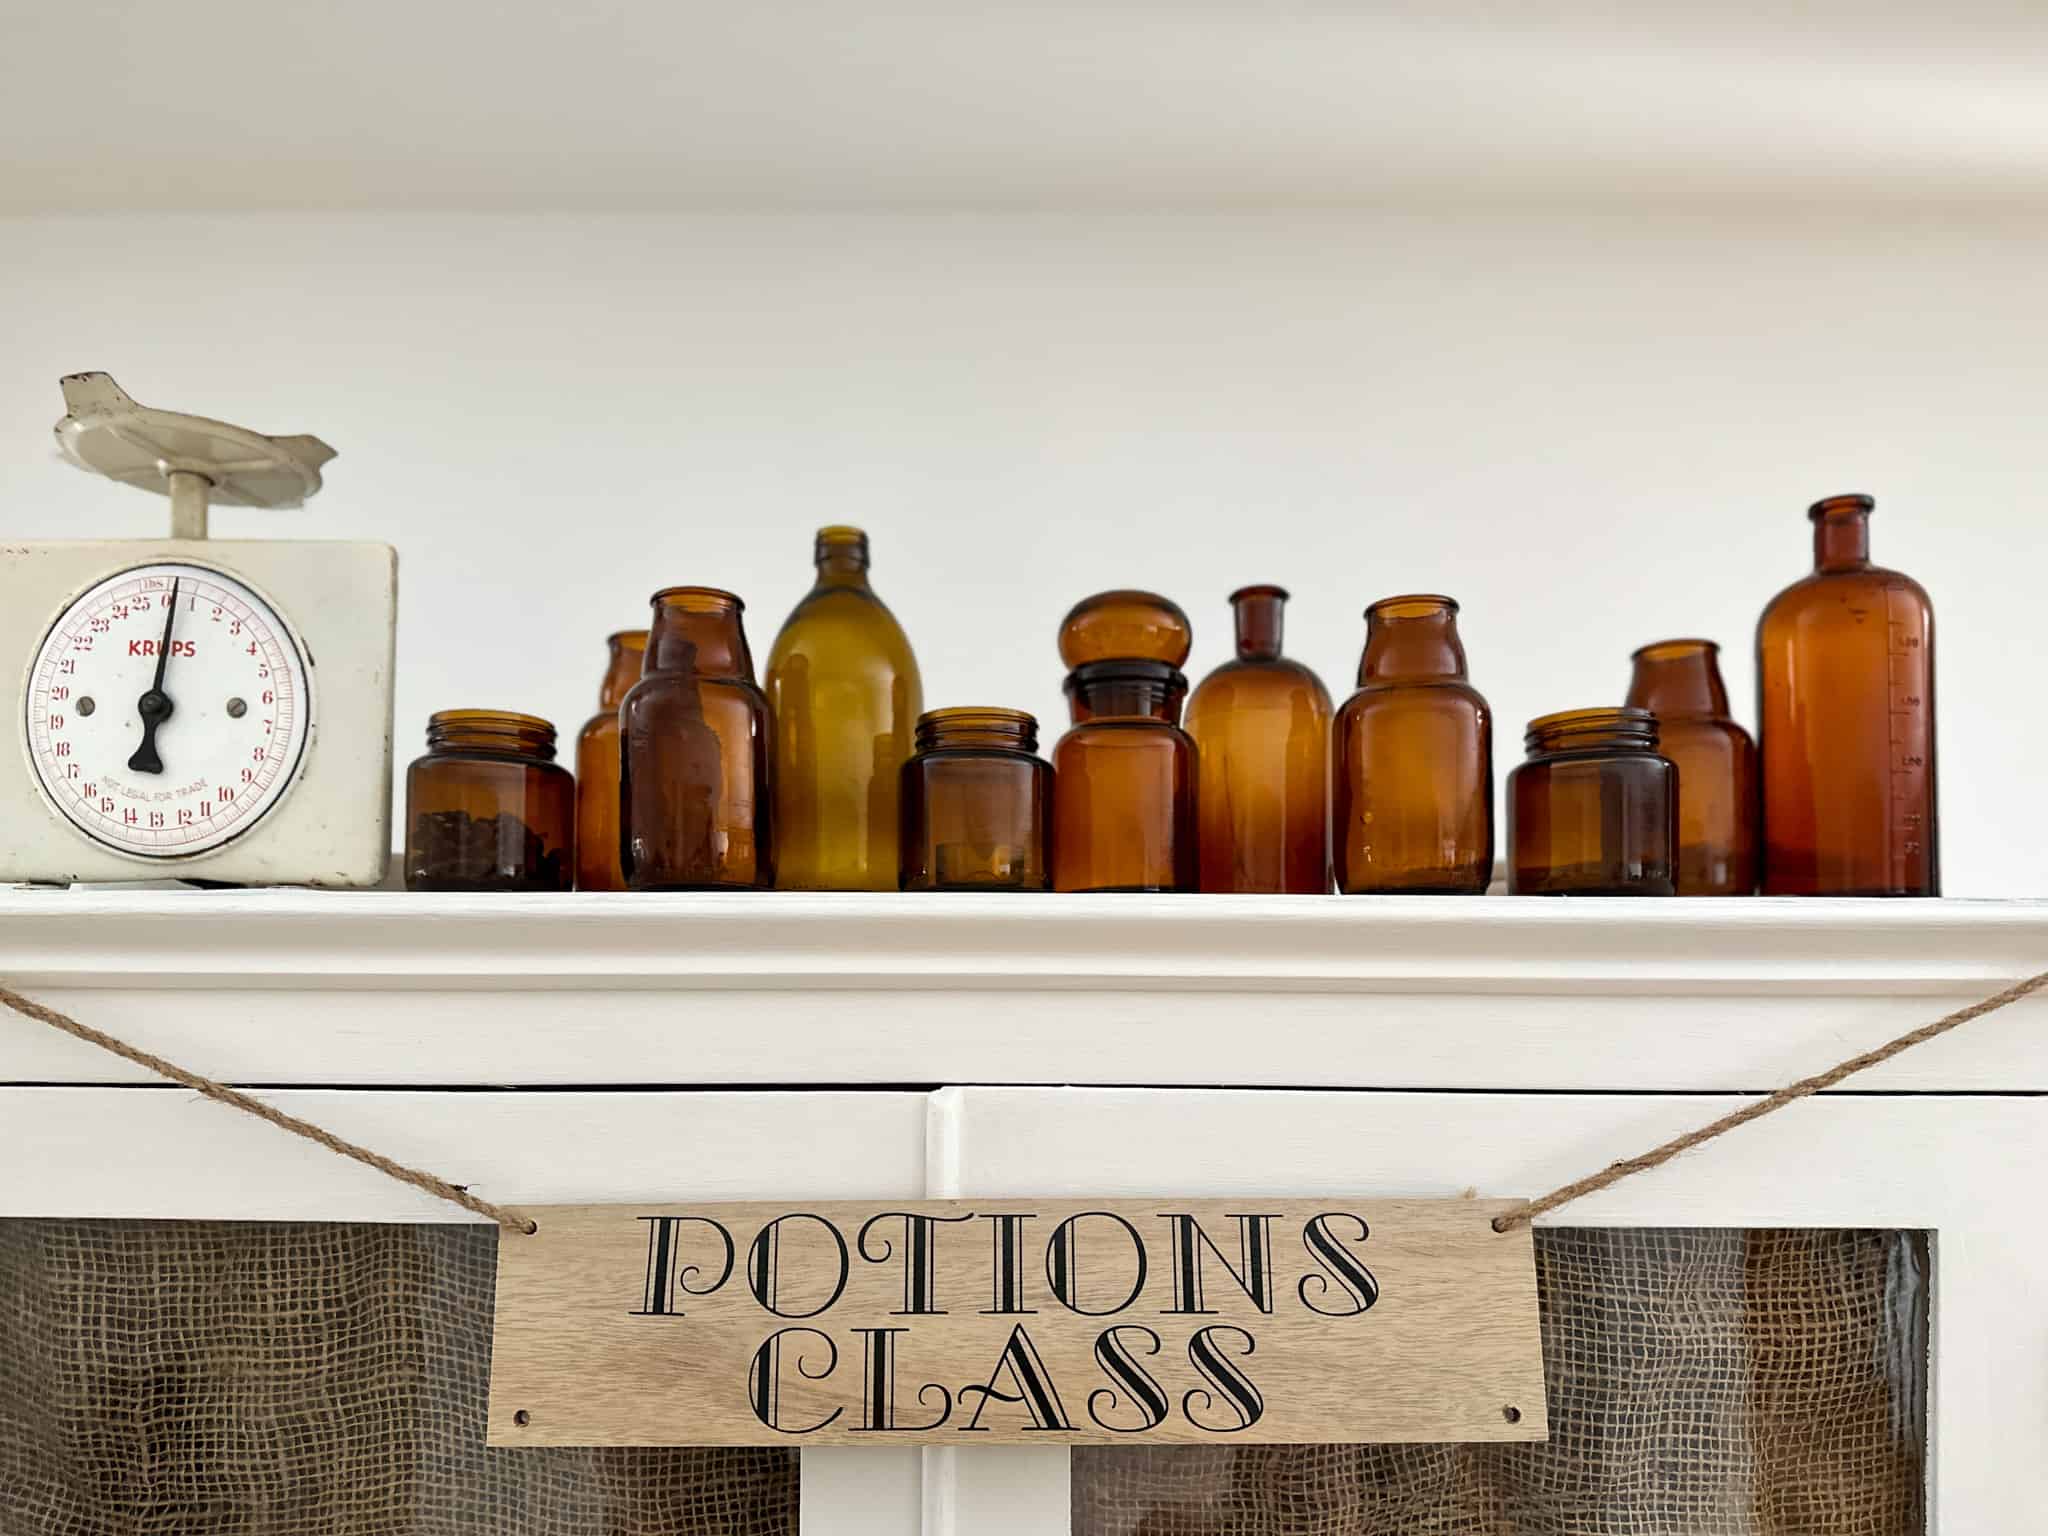 Harry Potter Potions Class sign